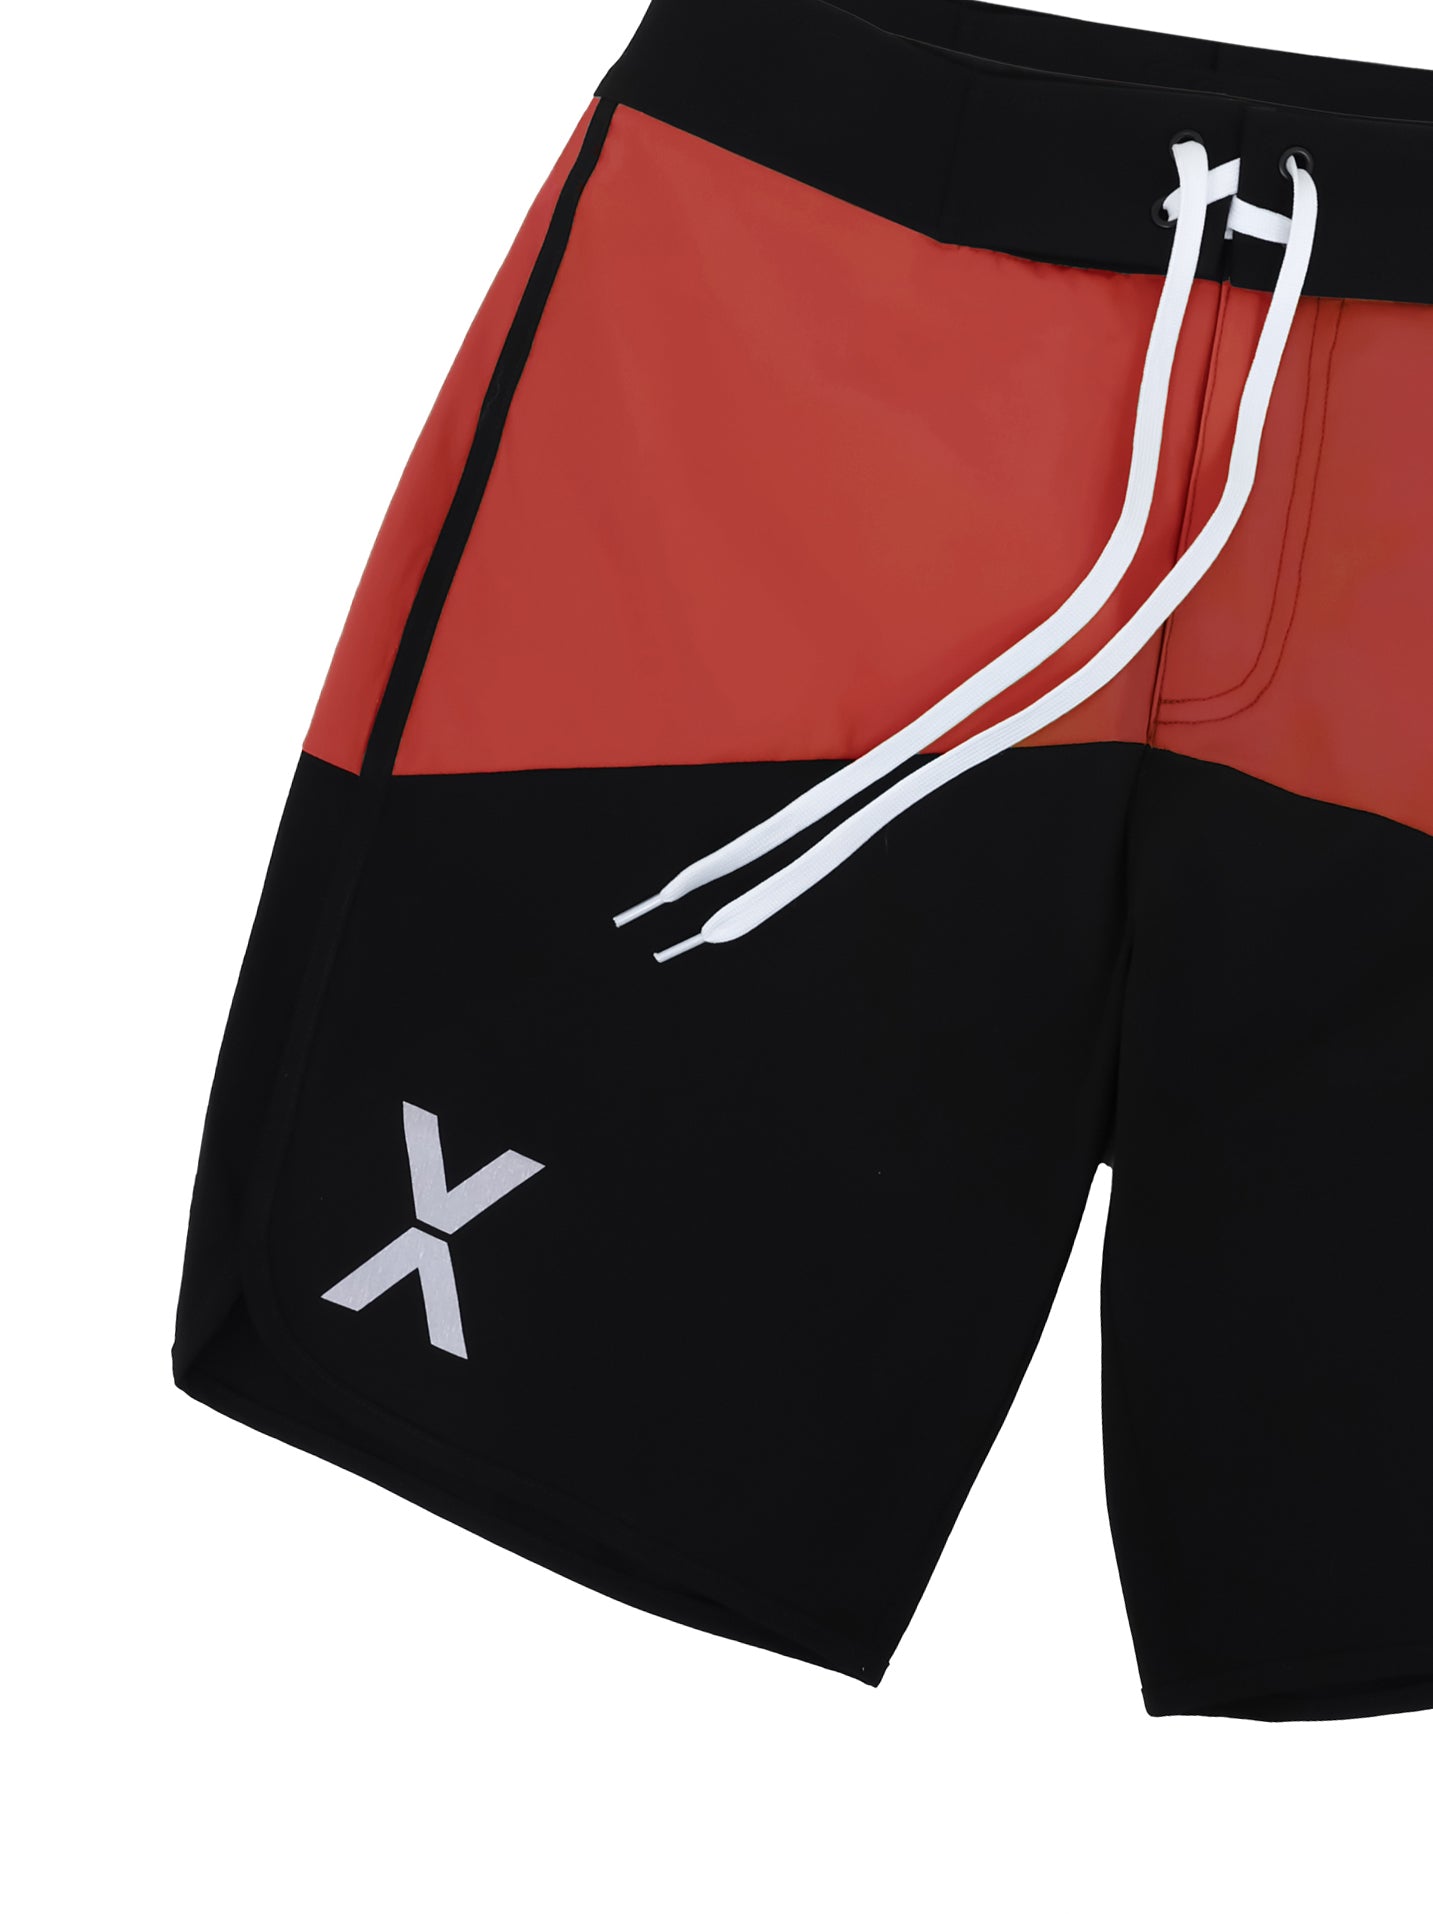 BICOLOR SURF SHORTS【RED】